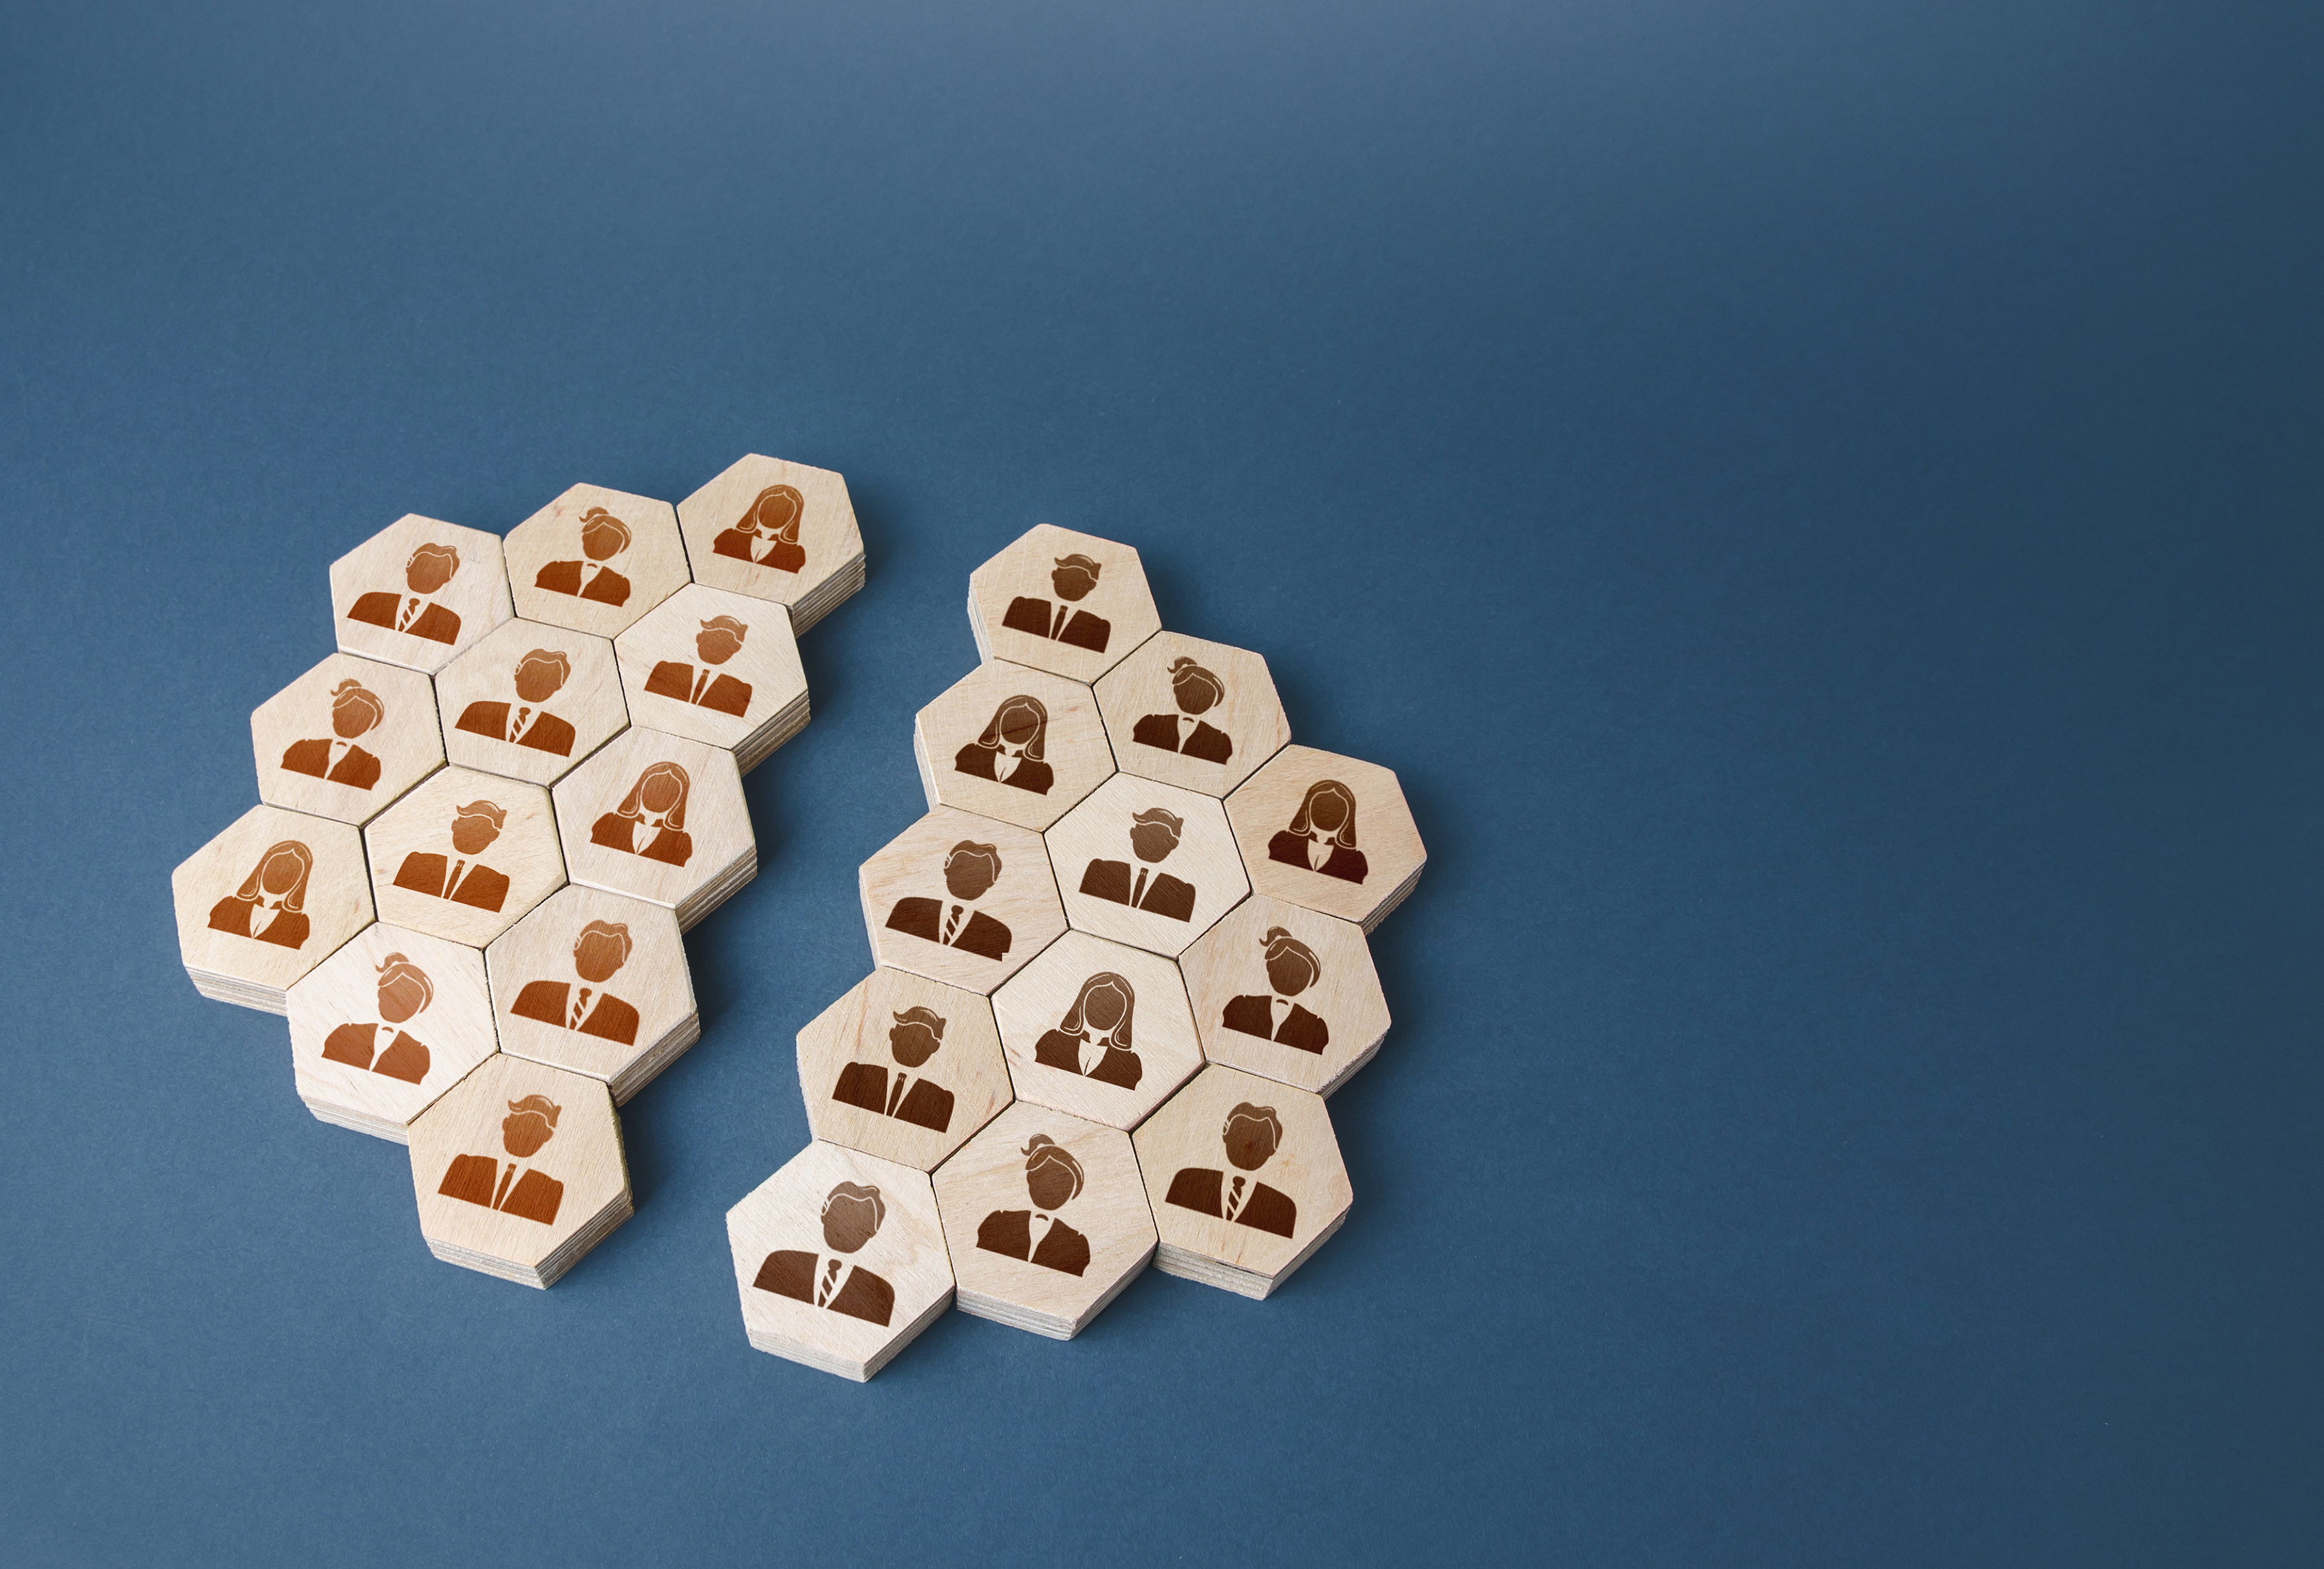 Decorative image of wooden blocks with people on them.